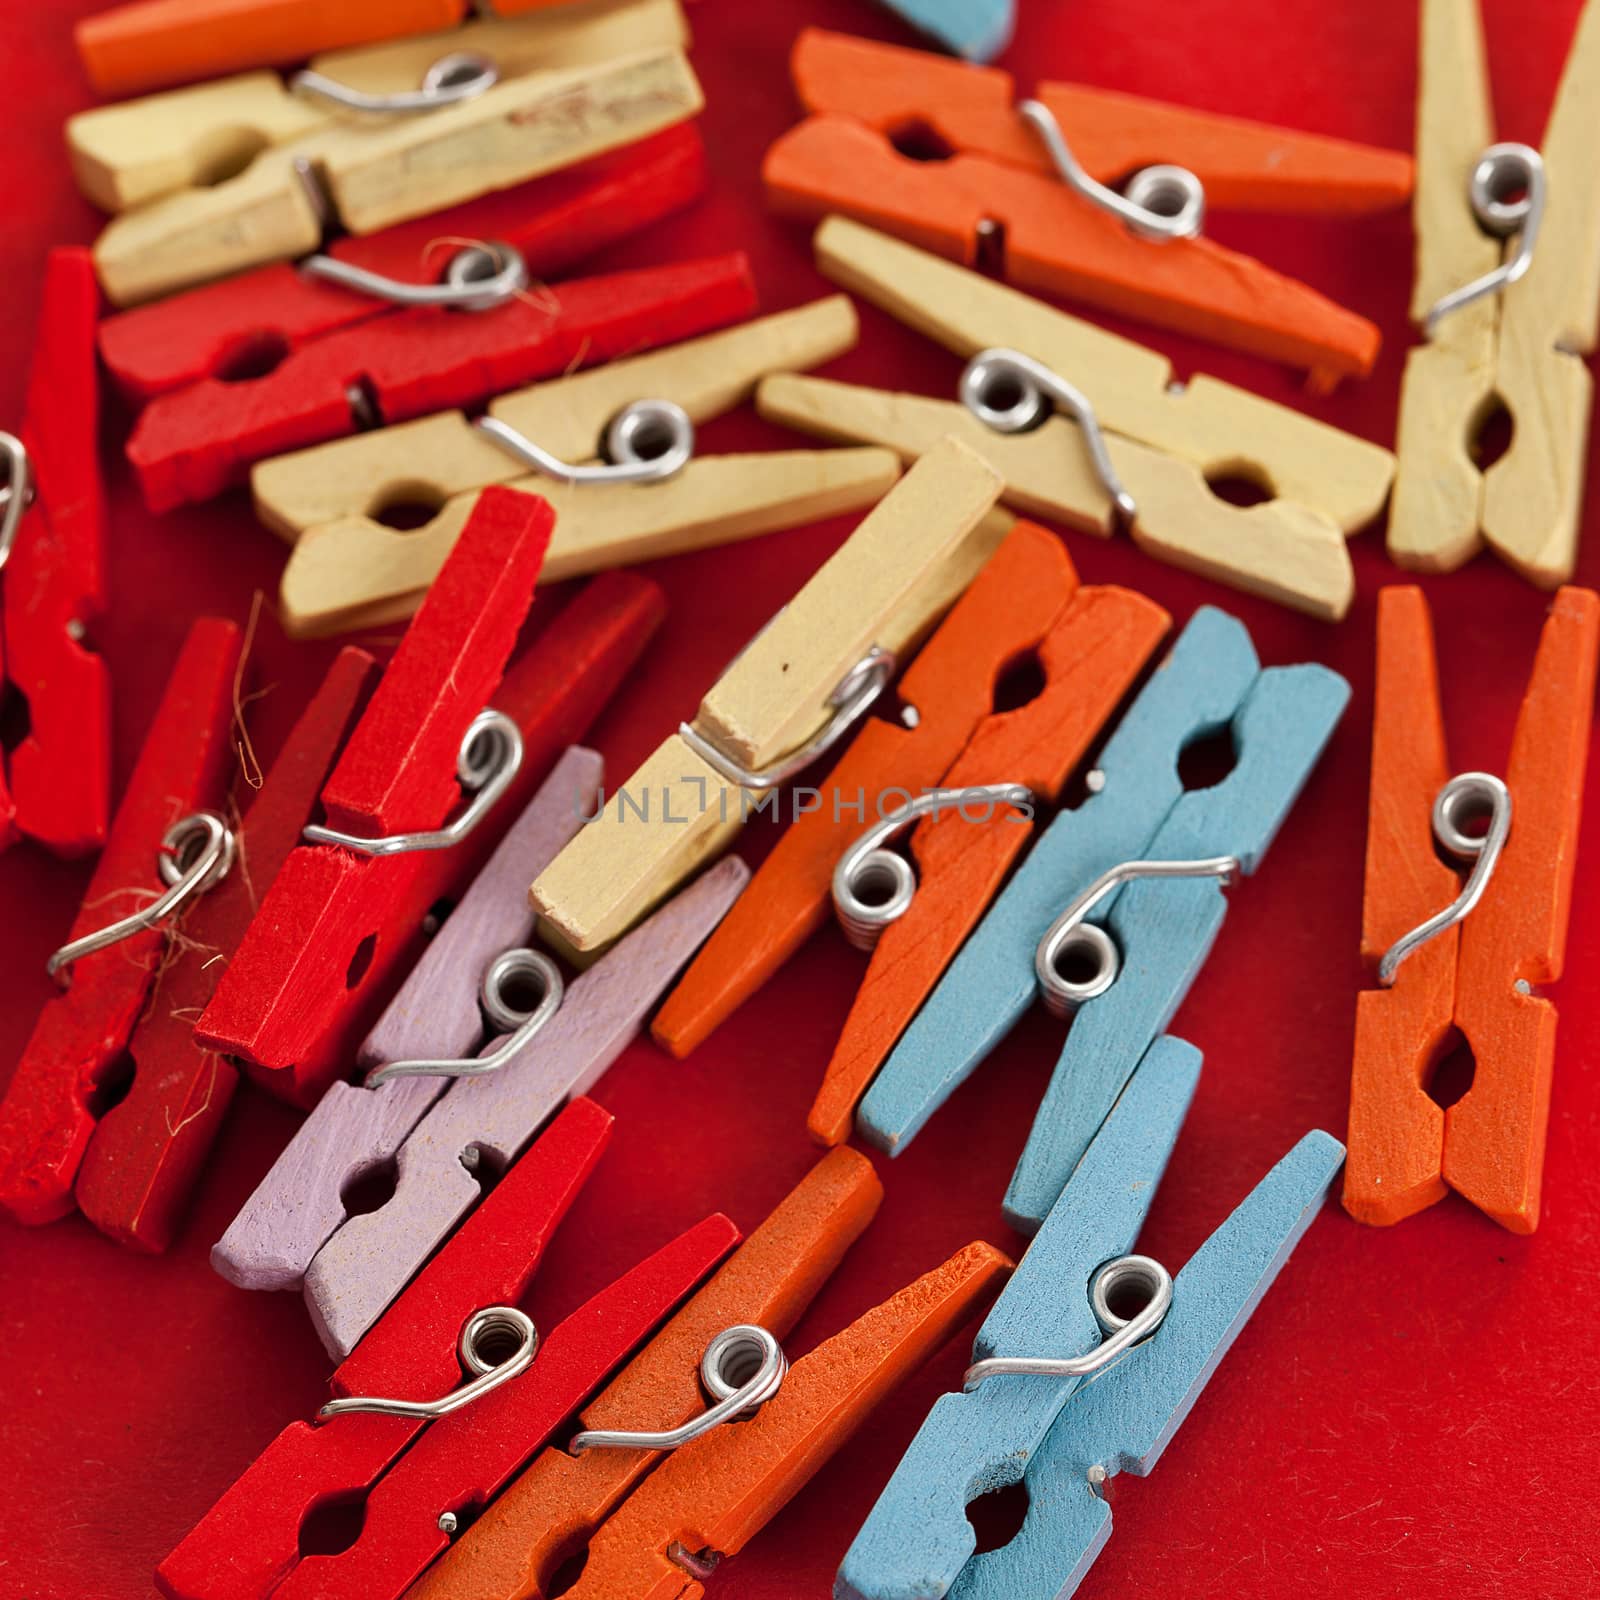 Closeup image of colorful office clothespins by rufatjumali